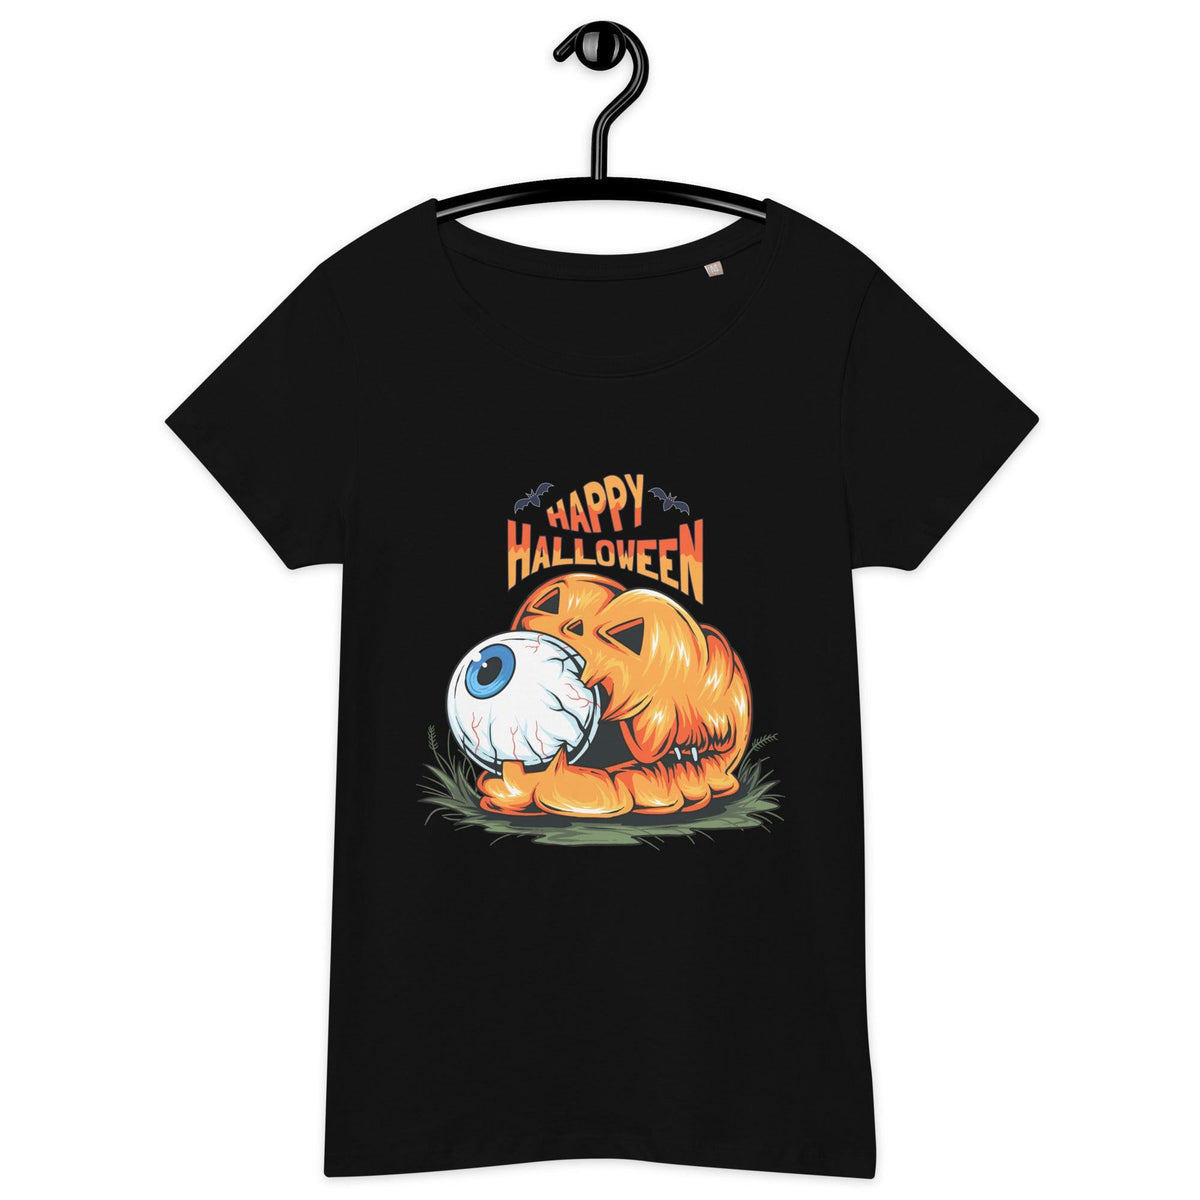 Organic Halloween Harvest Moon tee for women, perfect for a magical Halloween look.